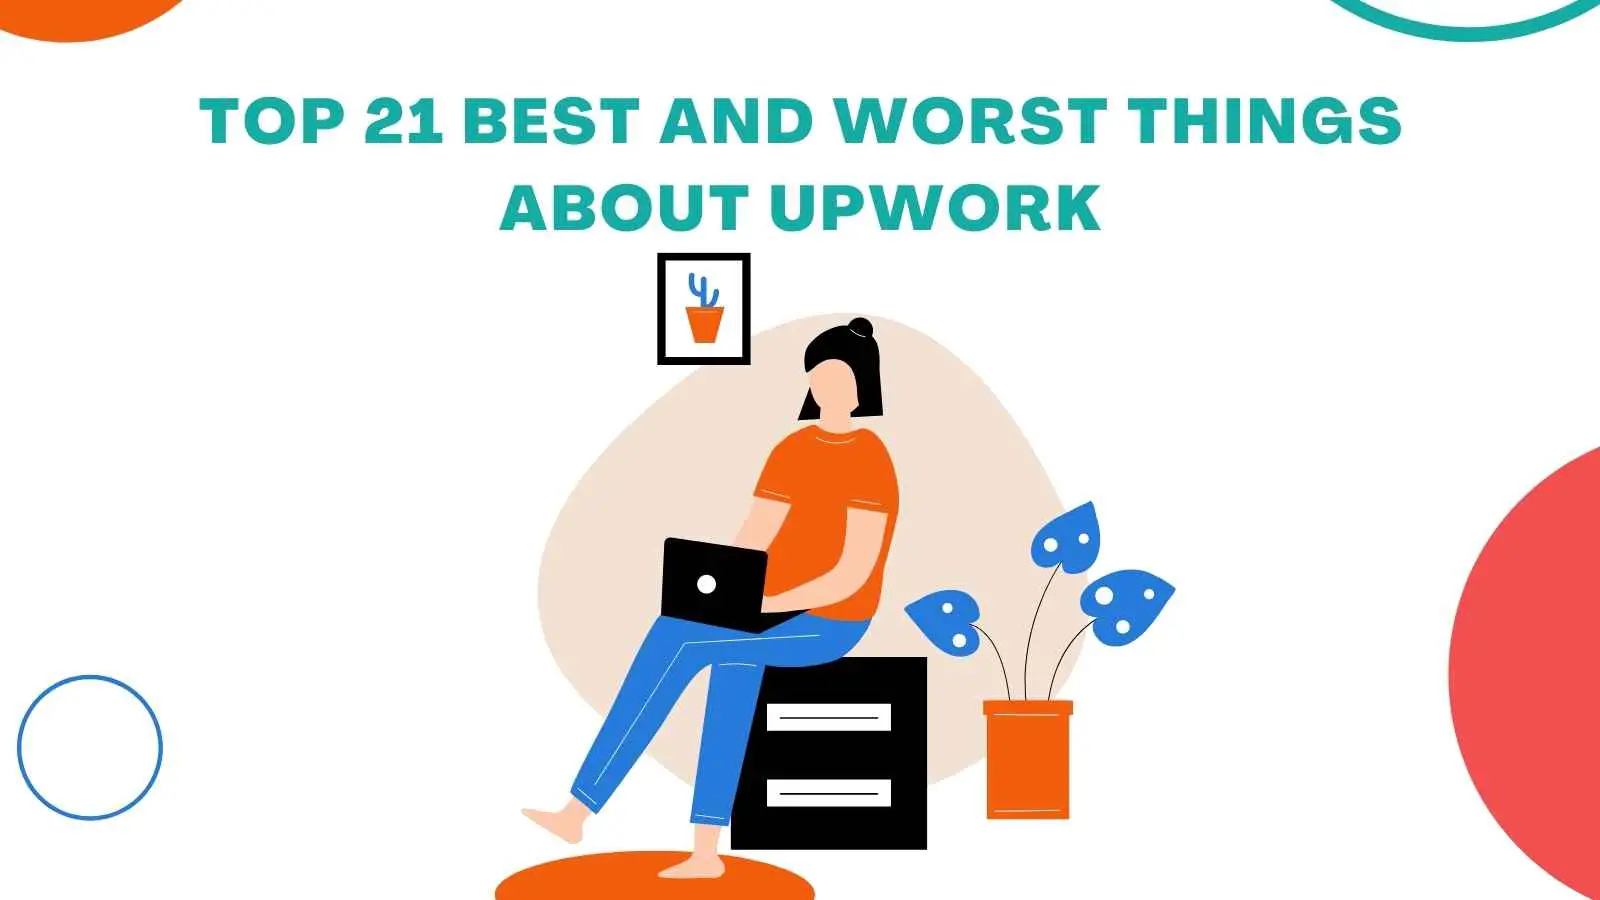 Top 21 Best And Worst Things About Upwork